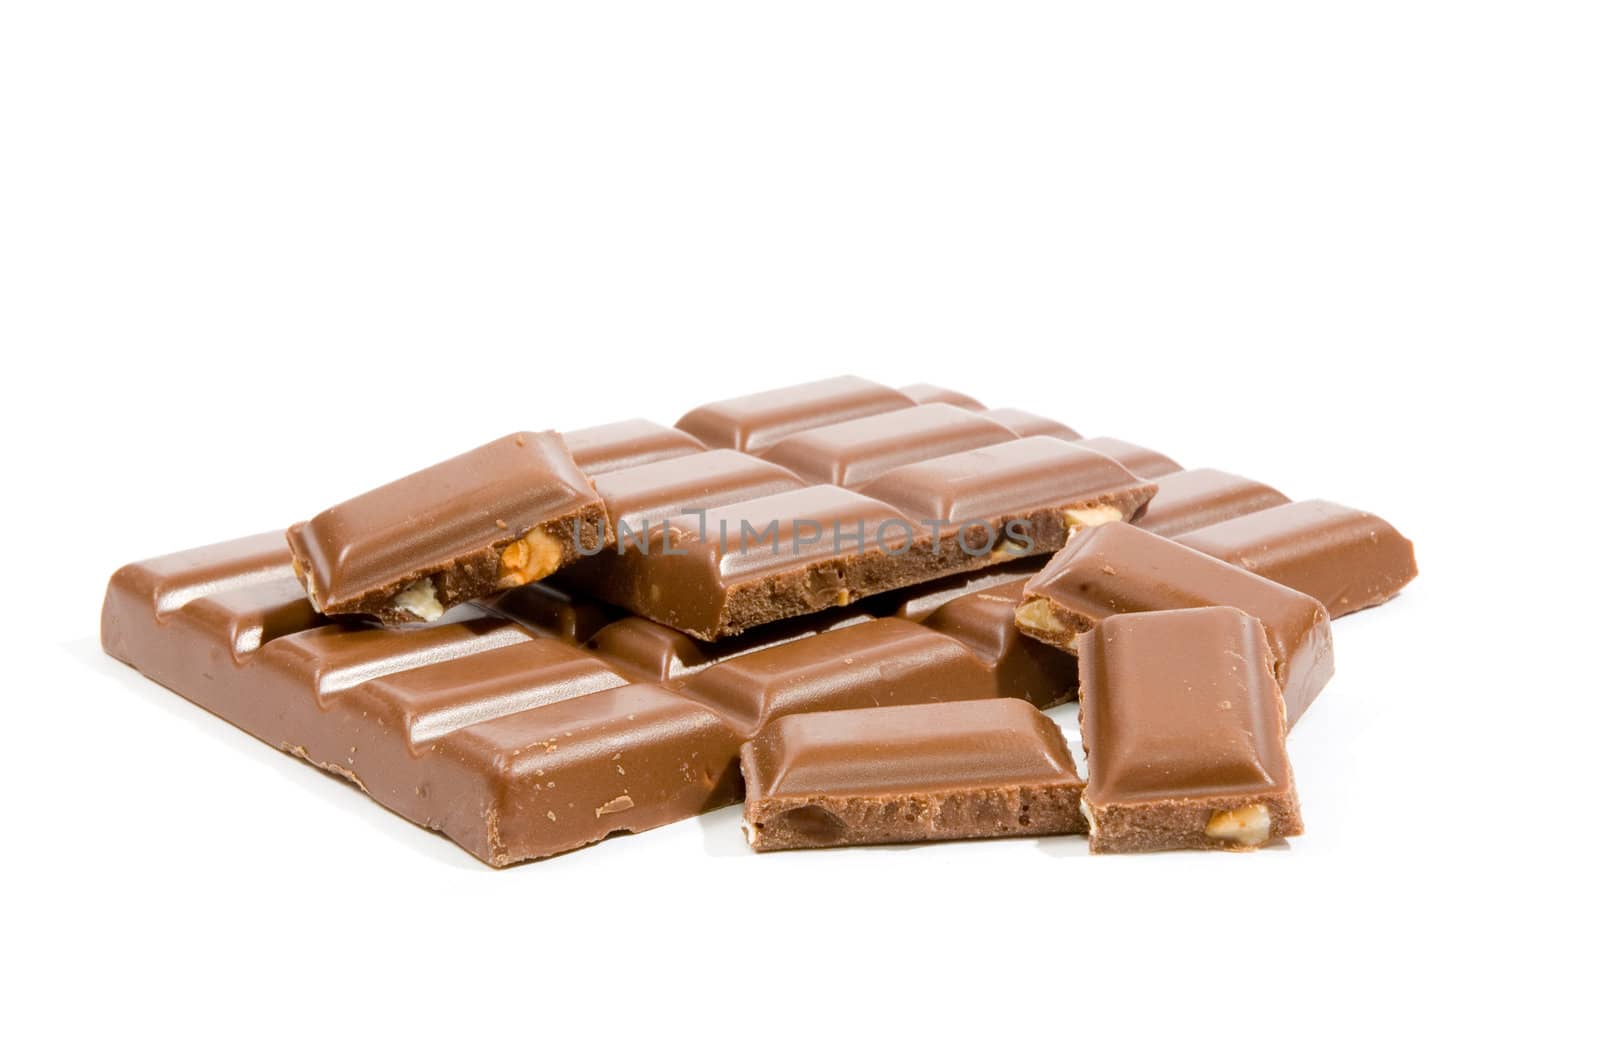 A chocolate bar isolated on white background

